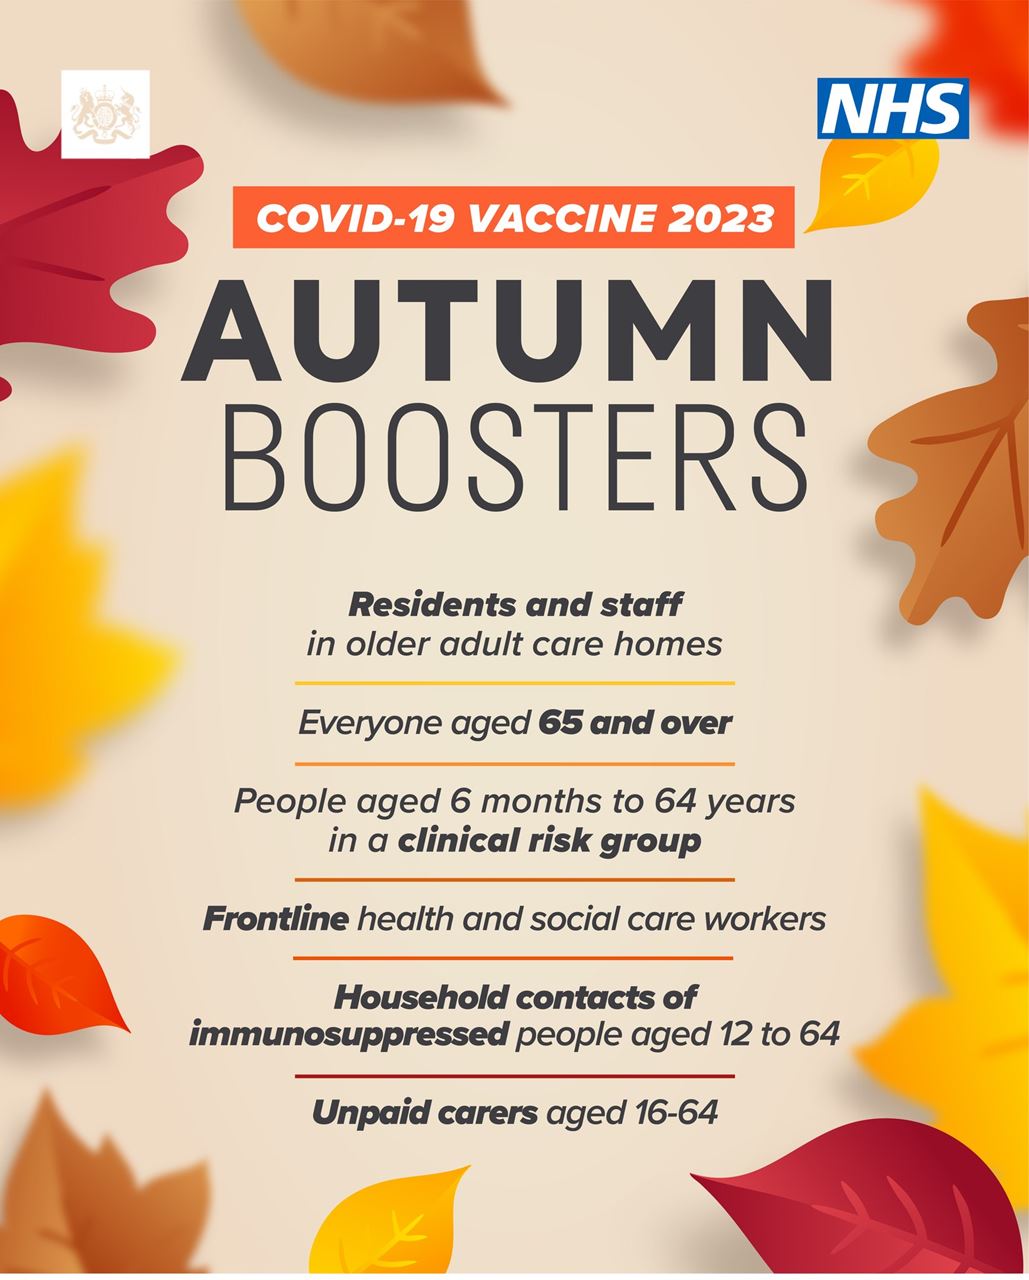 COVID Autumn Booster Programme 2023 Information